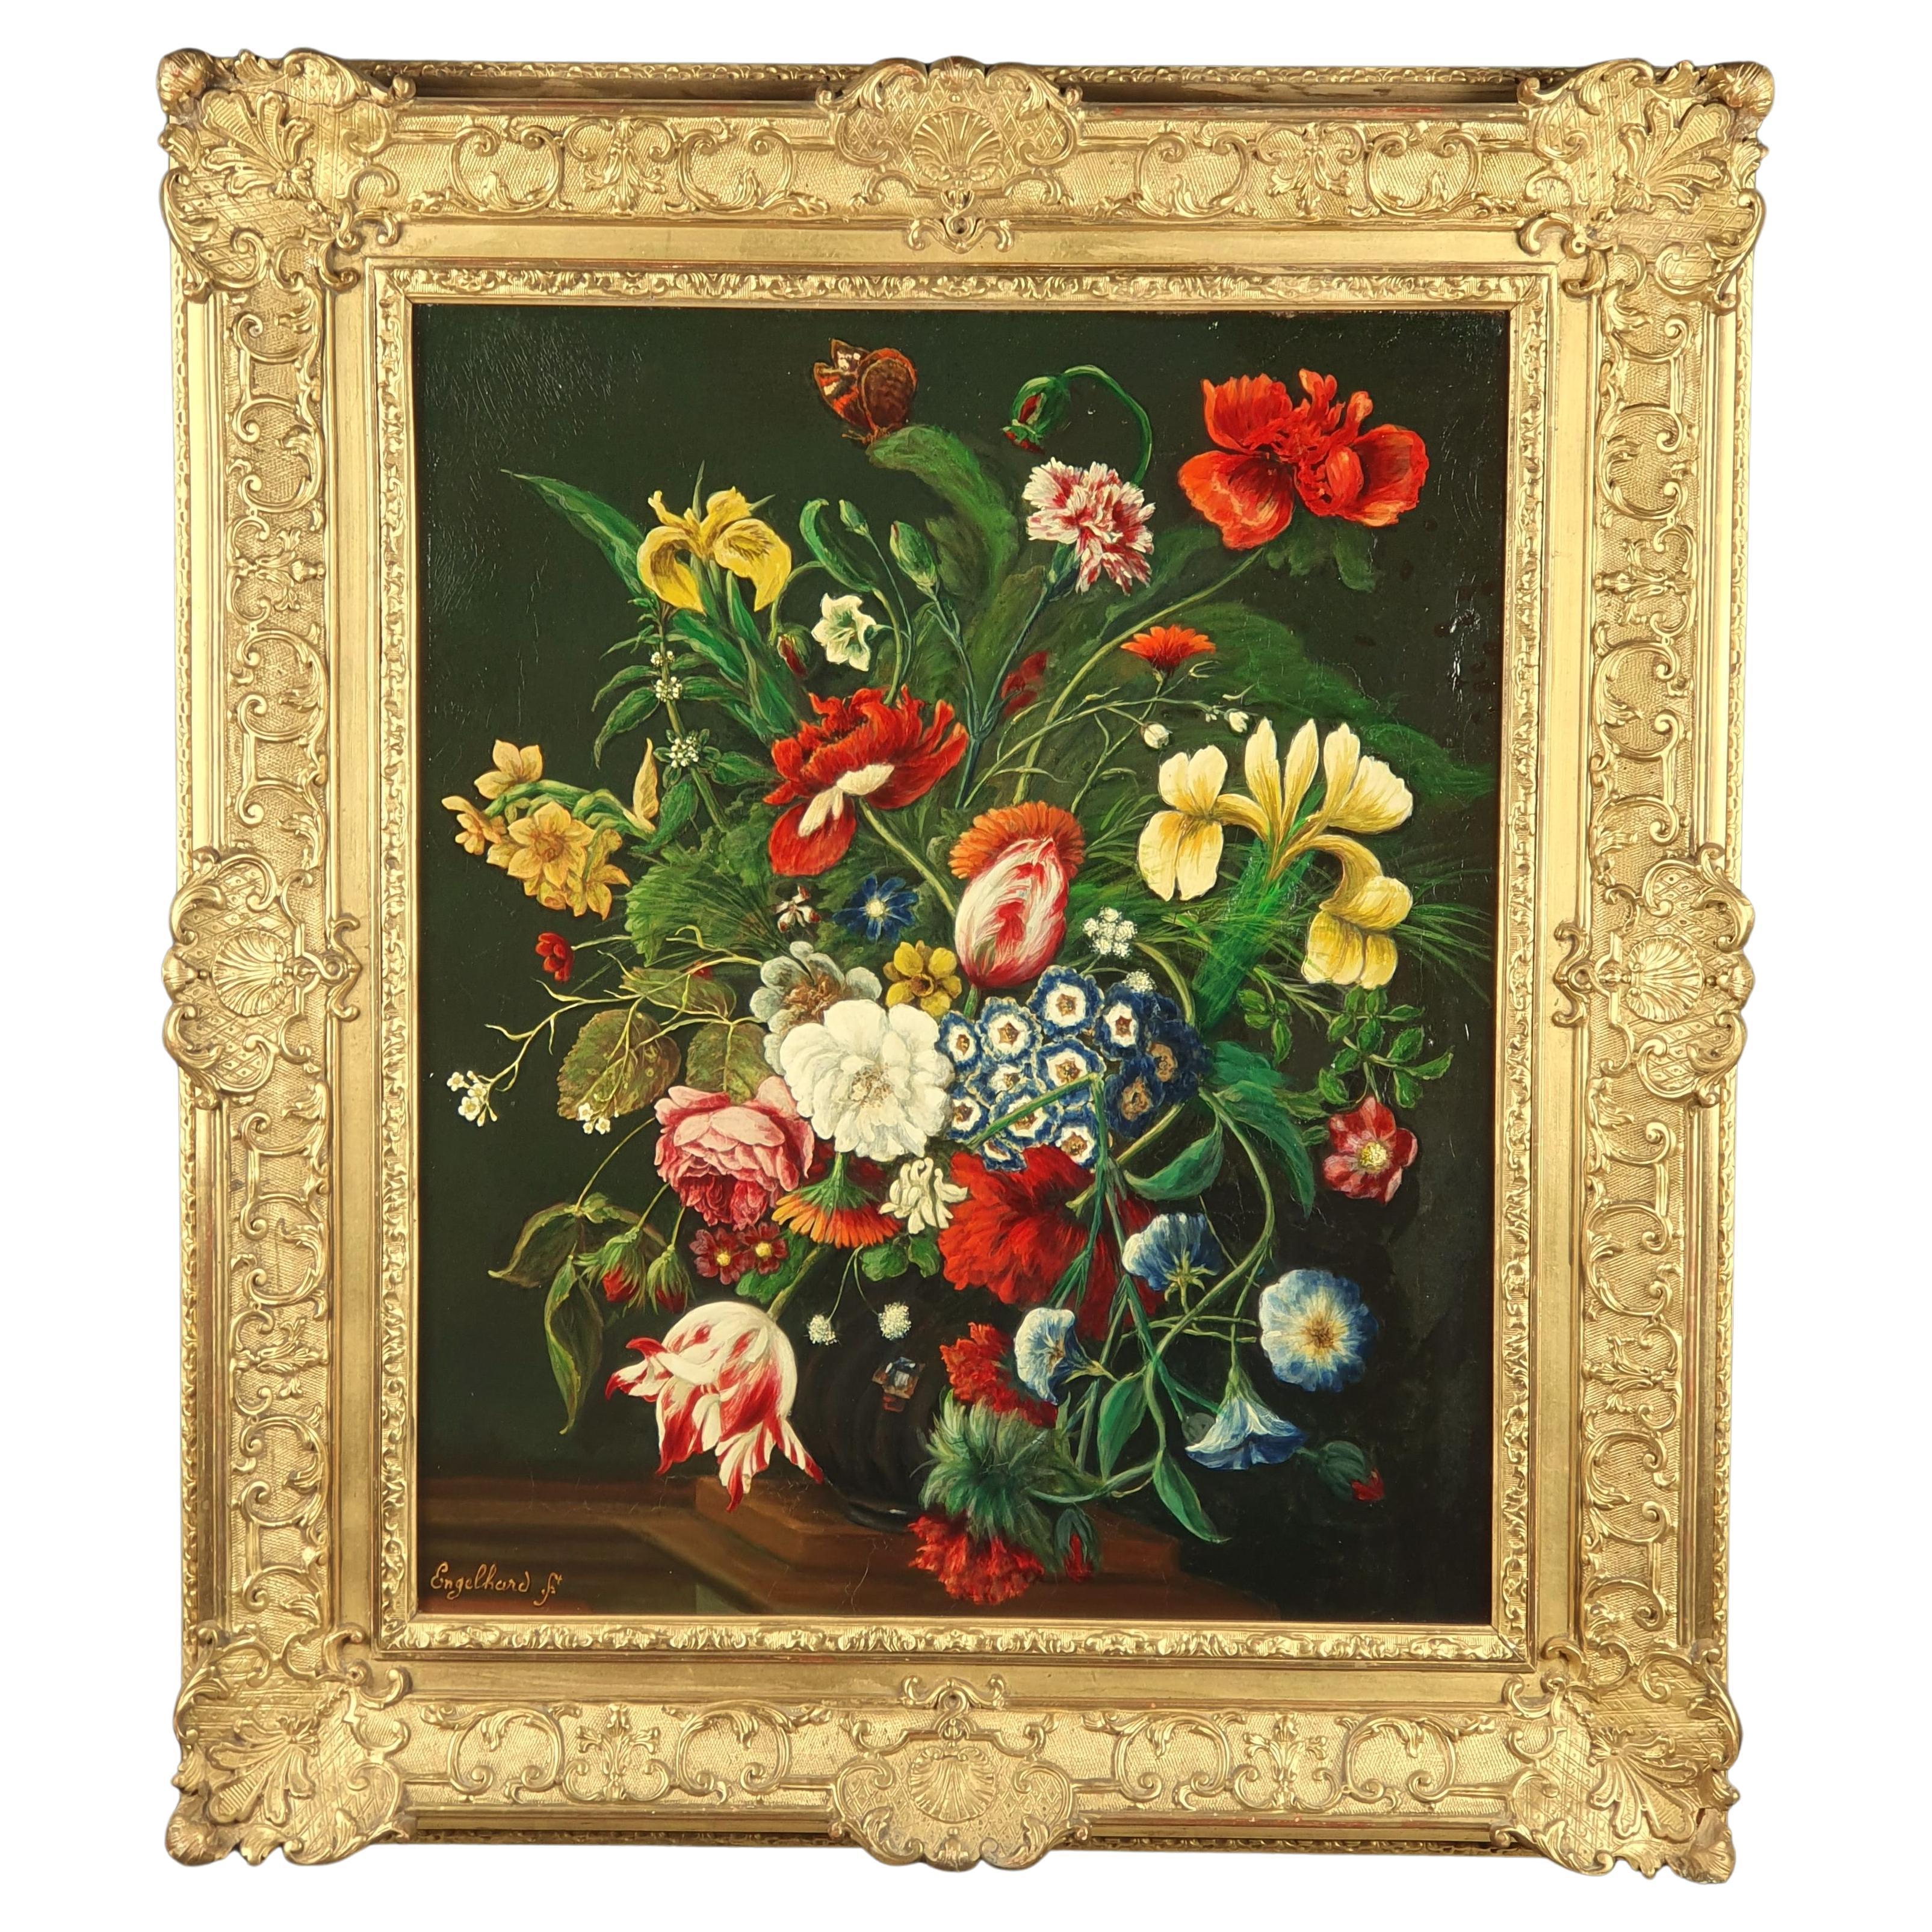 Dutch School, Oil on Canvas, Floral Composition in the Style of the Seventeen